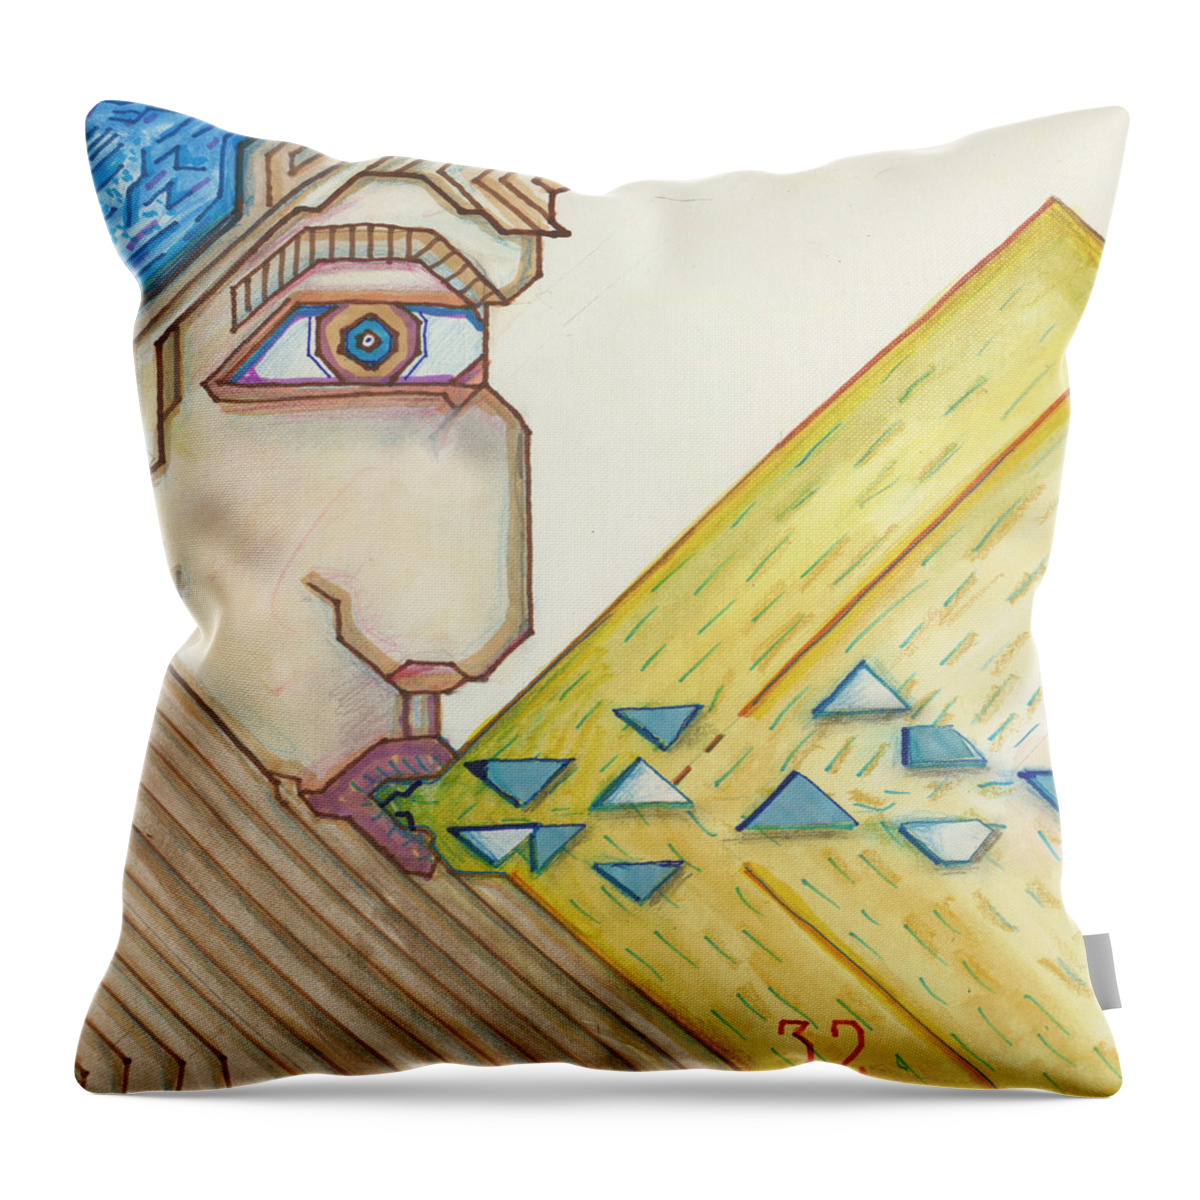 Bible Throw Pillow featuring the painting Deuteronomium - THE WIEDMANN BIBLE page 83 by Willy Wiedmann